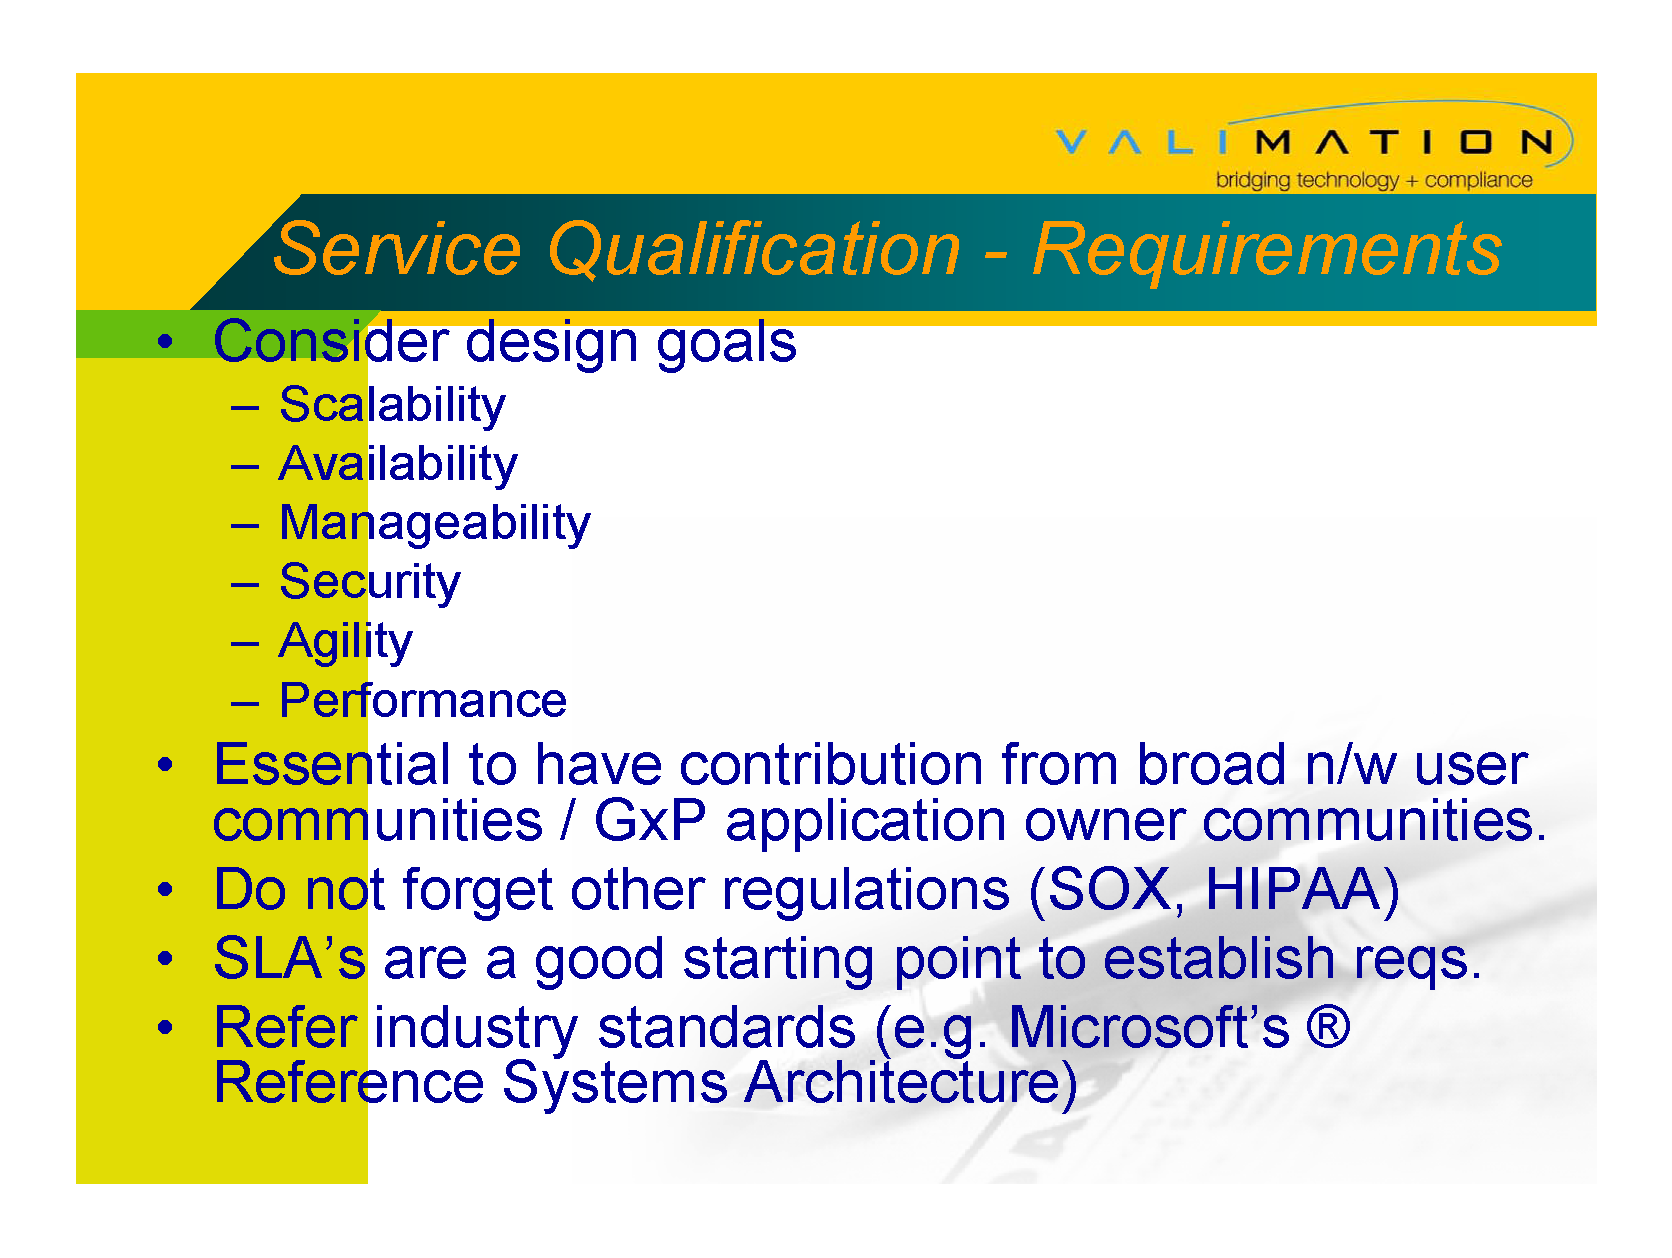 Network Qualification - Accretive Model By ValiMation_Page_12.png